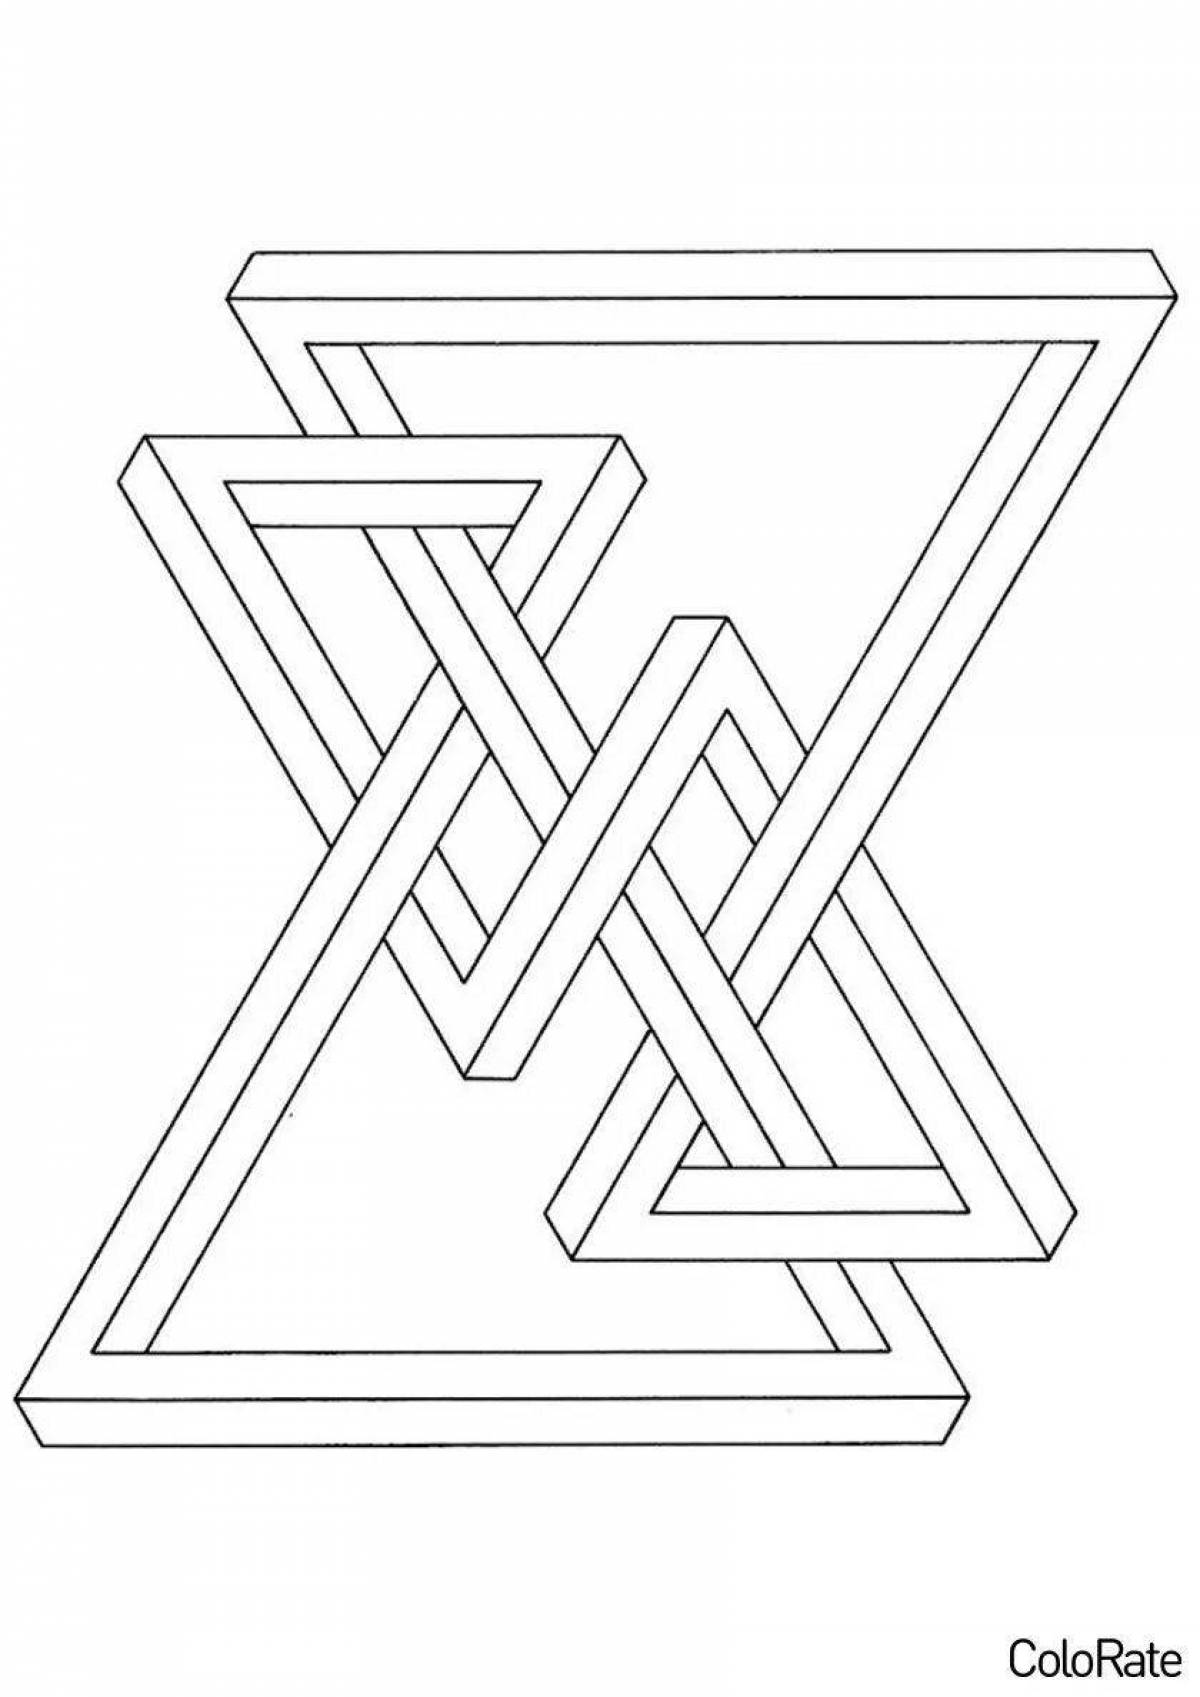 Coloring page for complex geometry